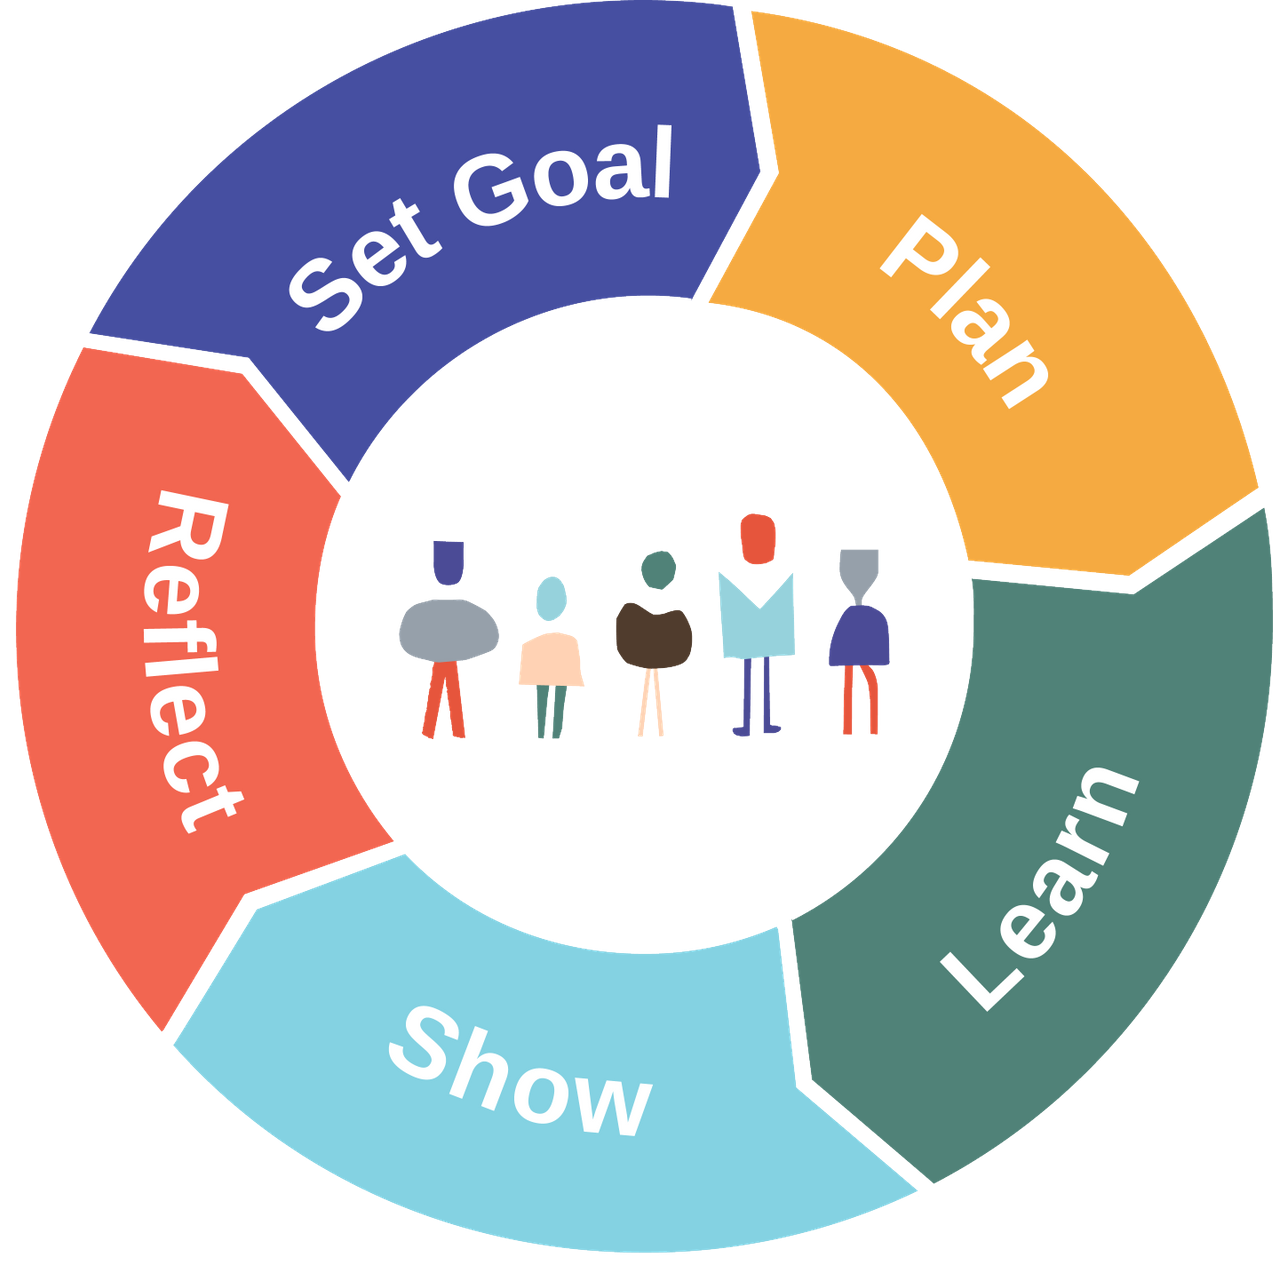 Self-Directed learning cycle: Set goal, Plan, Learn, Show, then Reflect